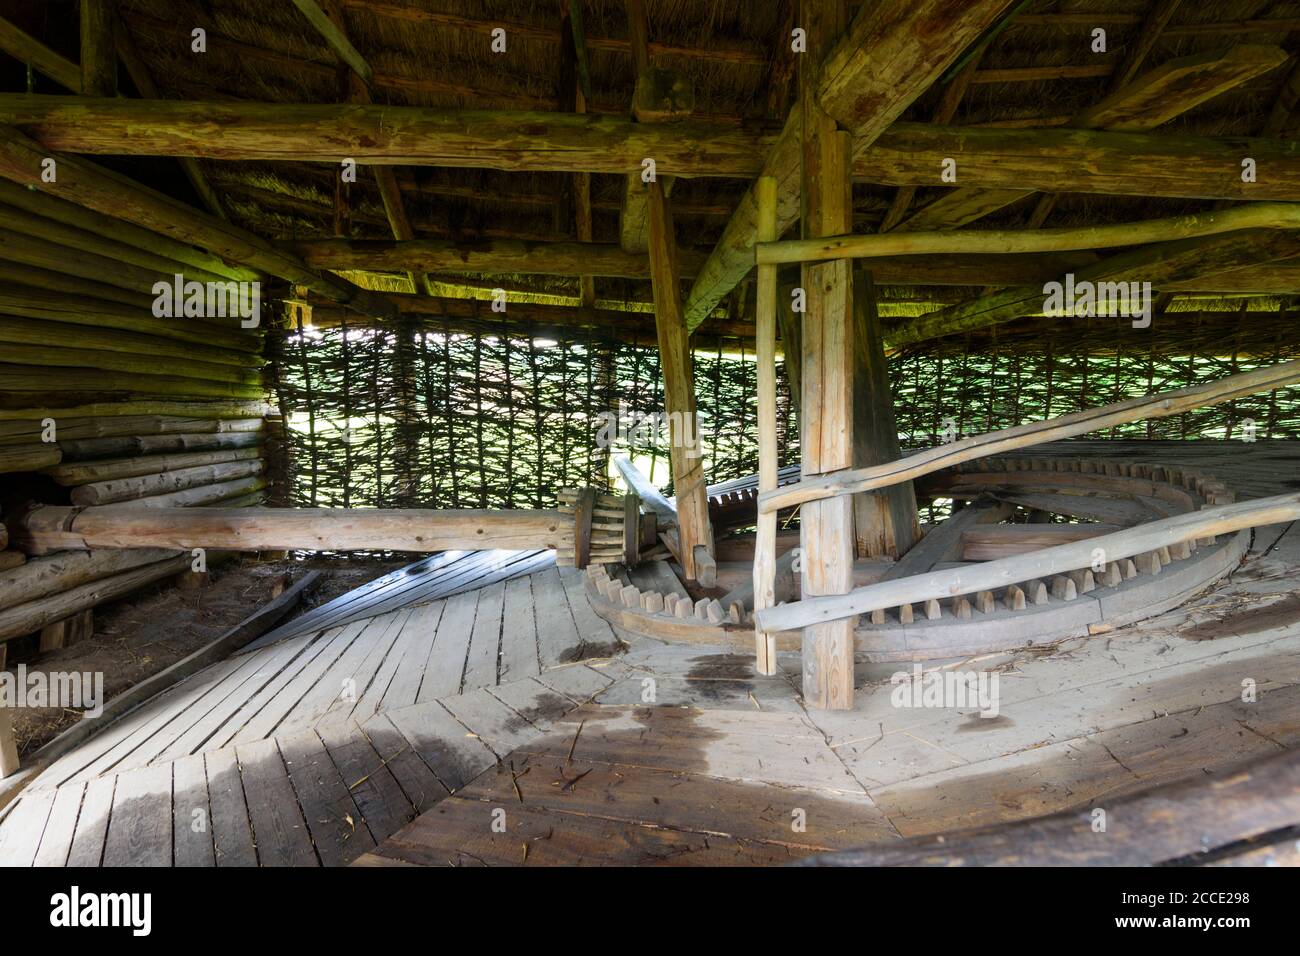 Kiev (Kyiv), Museum of Folk Architecture and Folkways of Ukraine in Pyrohiv, 'Kruporushka' groat mill, used for buckwheat processing with a horse-driv Stock Photo